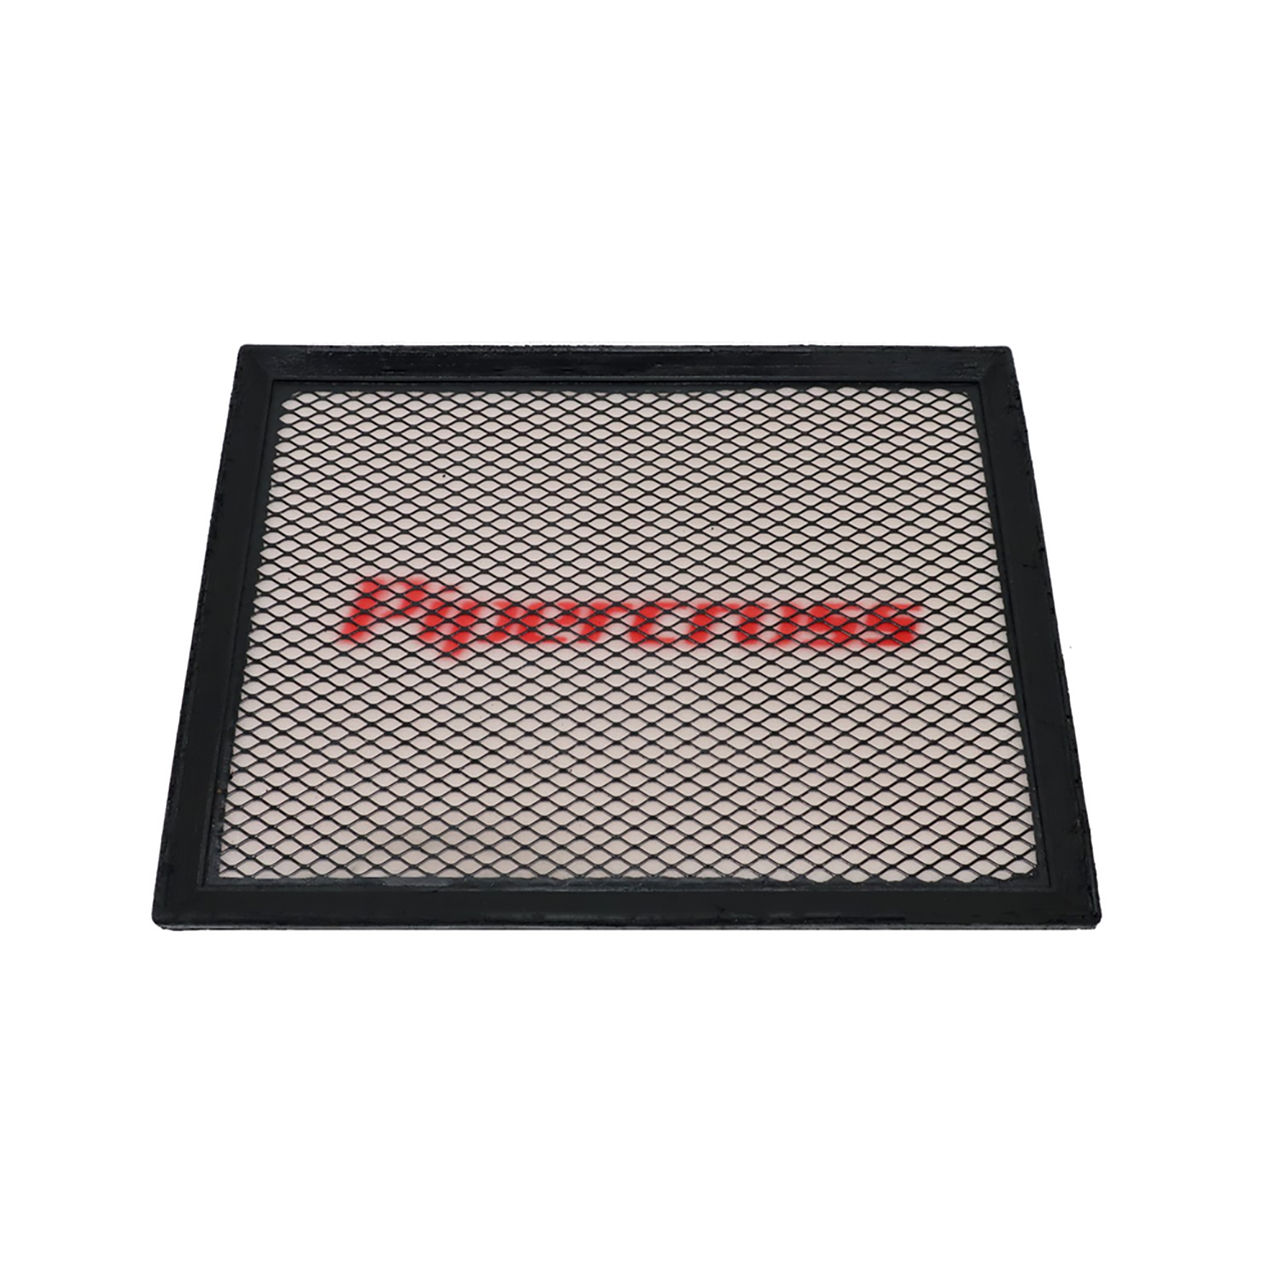 PIPERCROSS PANEL FILTER VAUXHALL VECTRA C MOST MODELS PP1670 AIR INDUCTION 